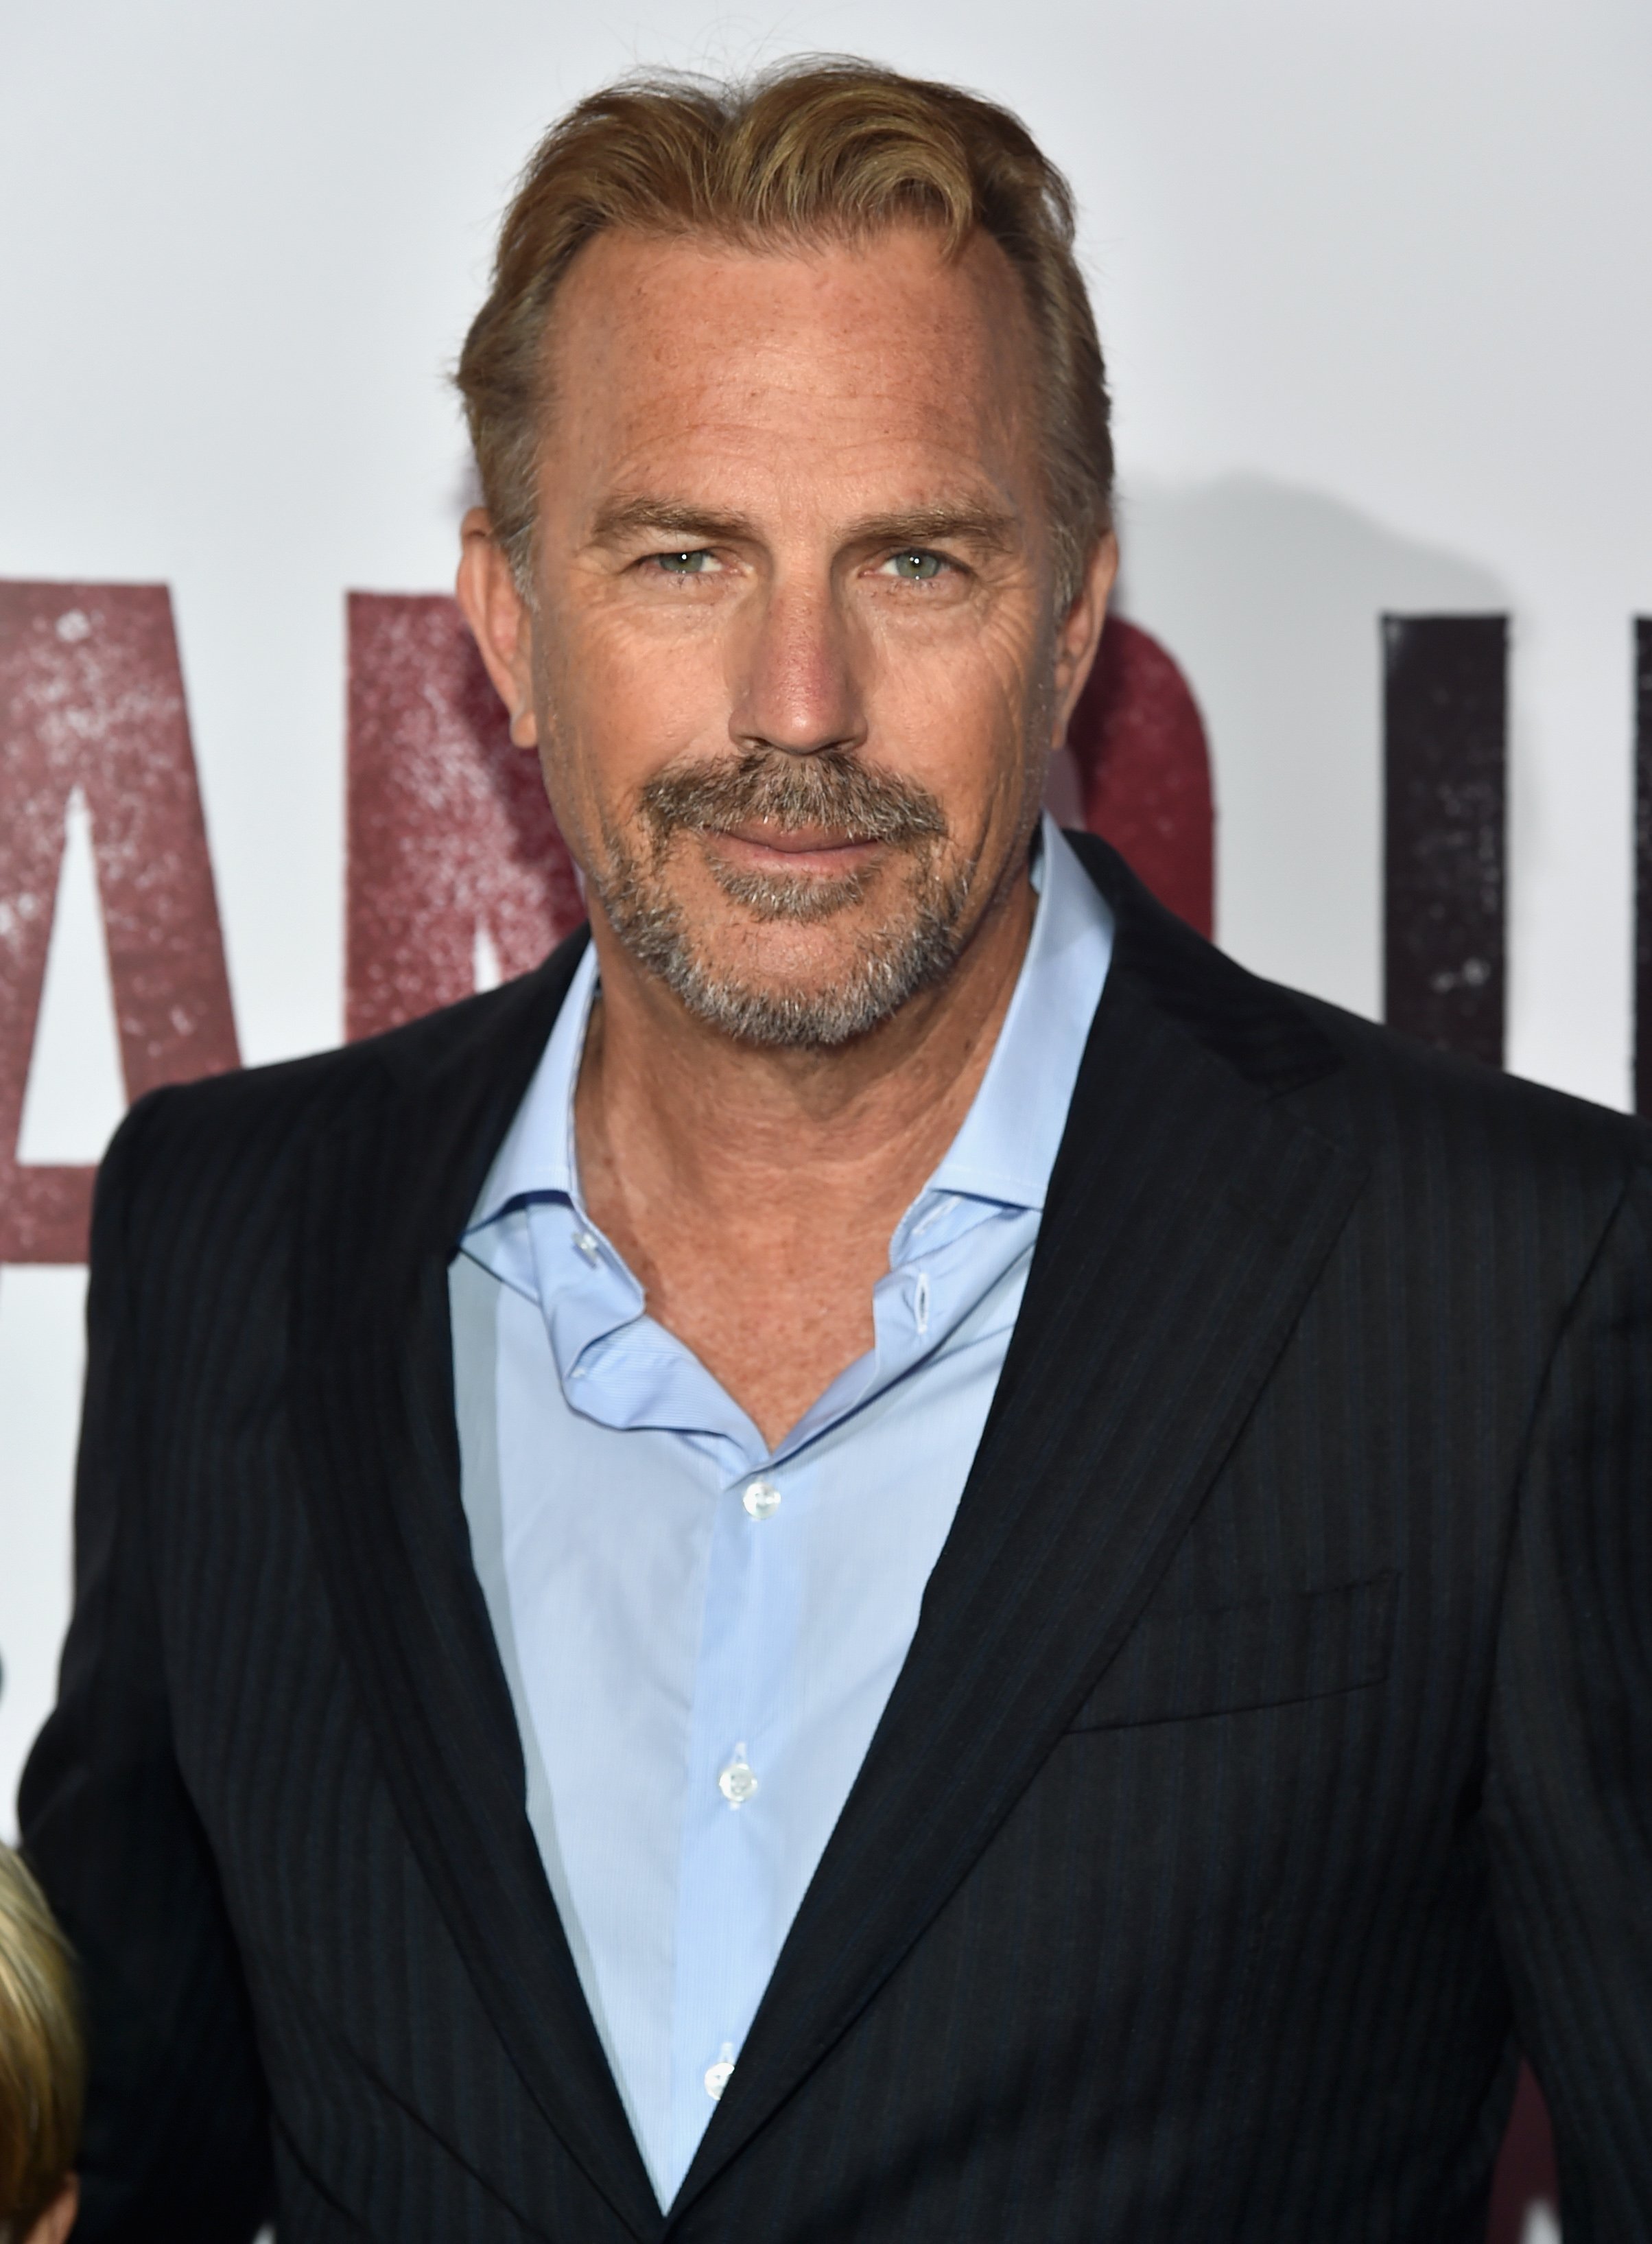 Actor Kevin Costner attends the world premiere of "McFarland, USA" at The El Capitan Theatre on February 9, 2015 in Hollywood, California.| Source: Getty Images